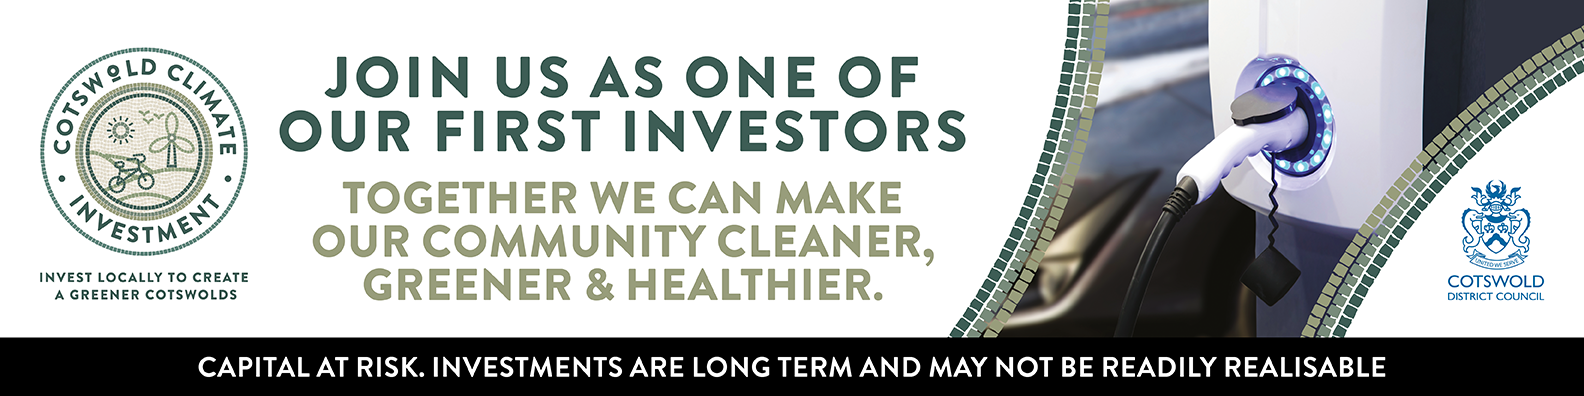 See how you can invest your money directly in a cleaner, greener, healthier future for all